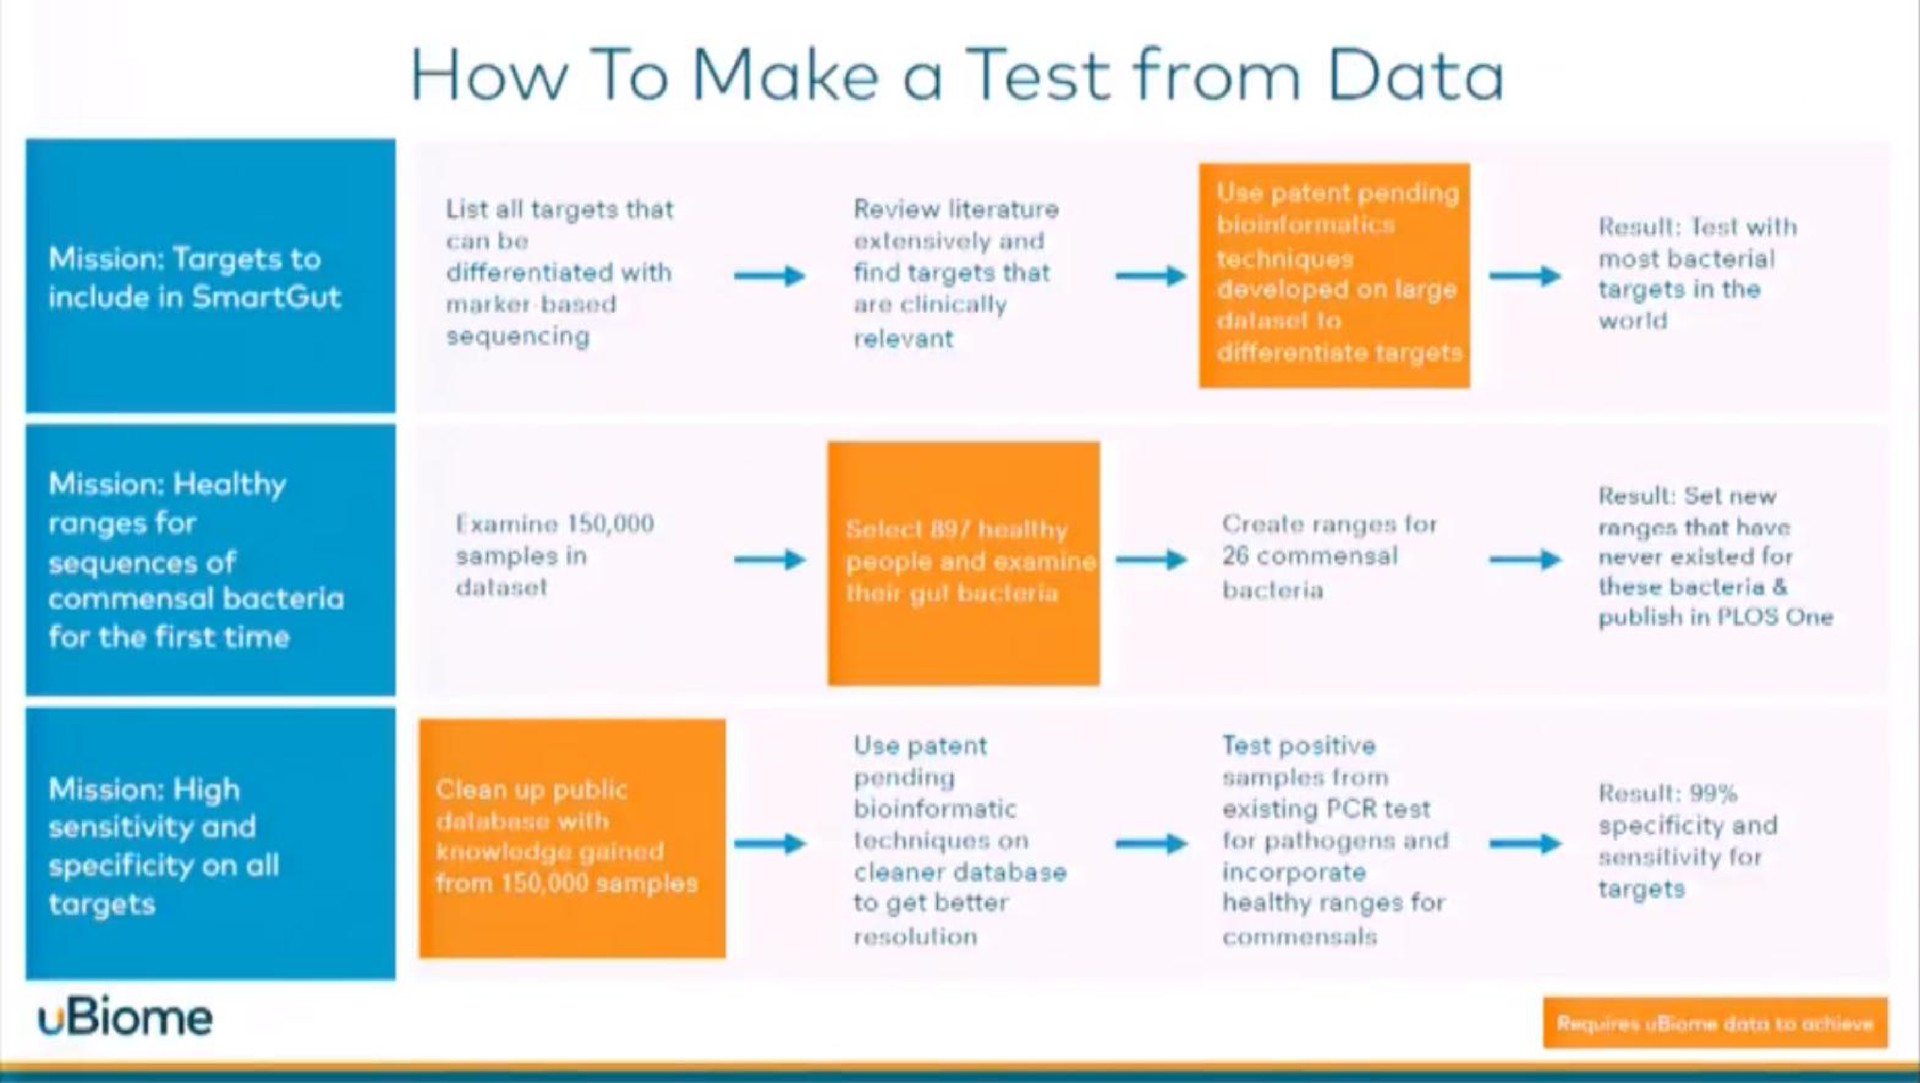 how to make a test from data | uBiome